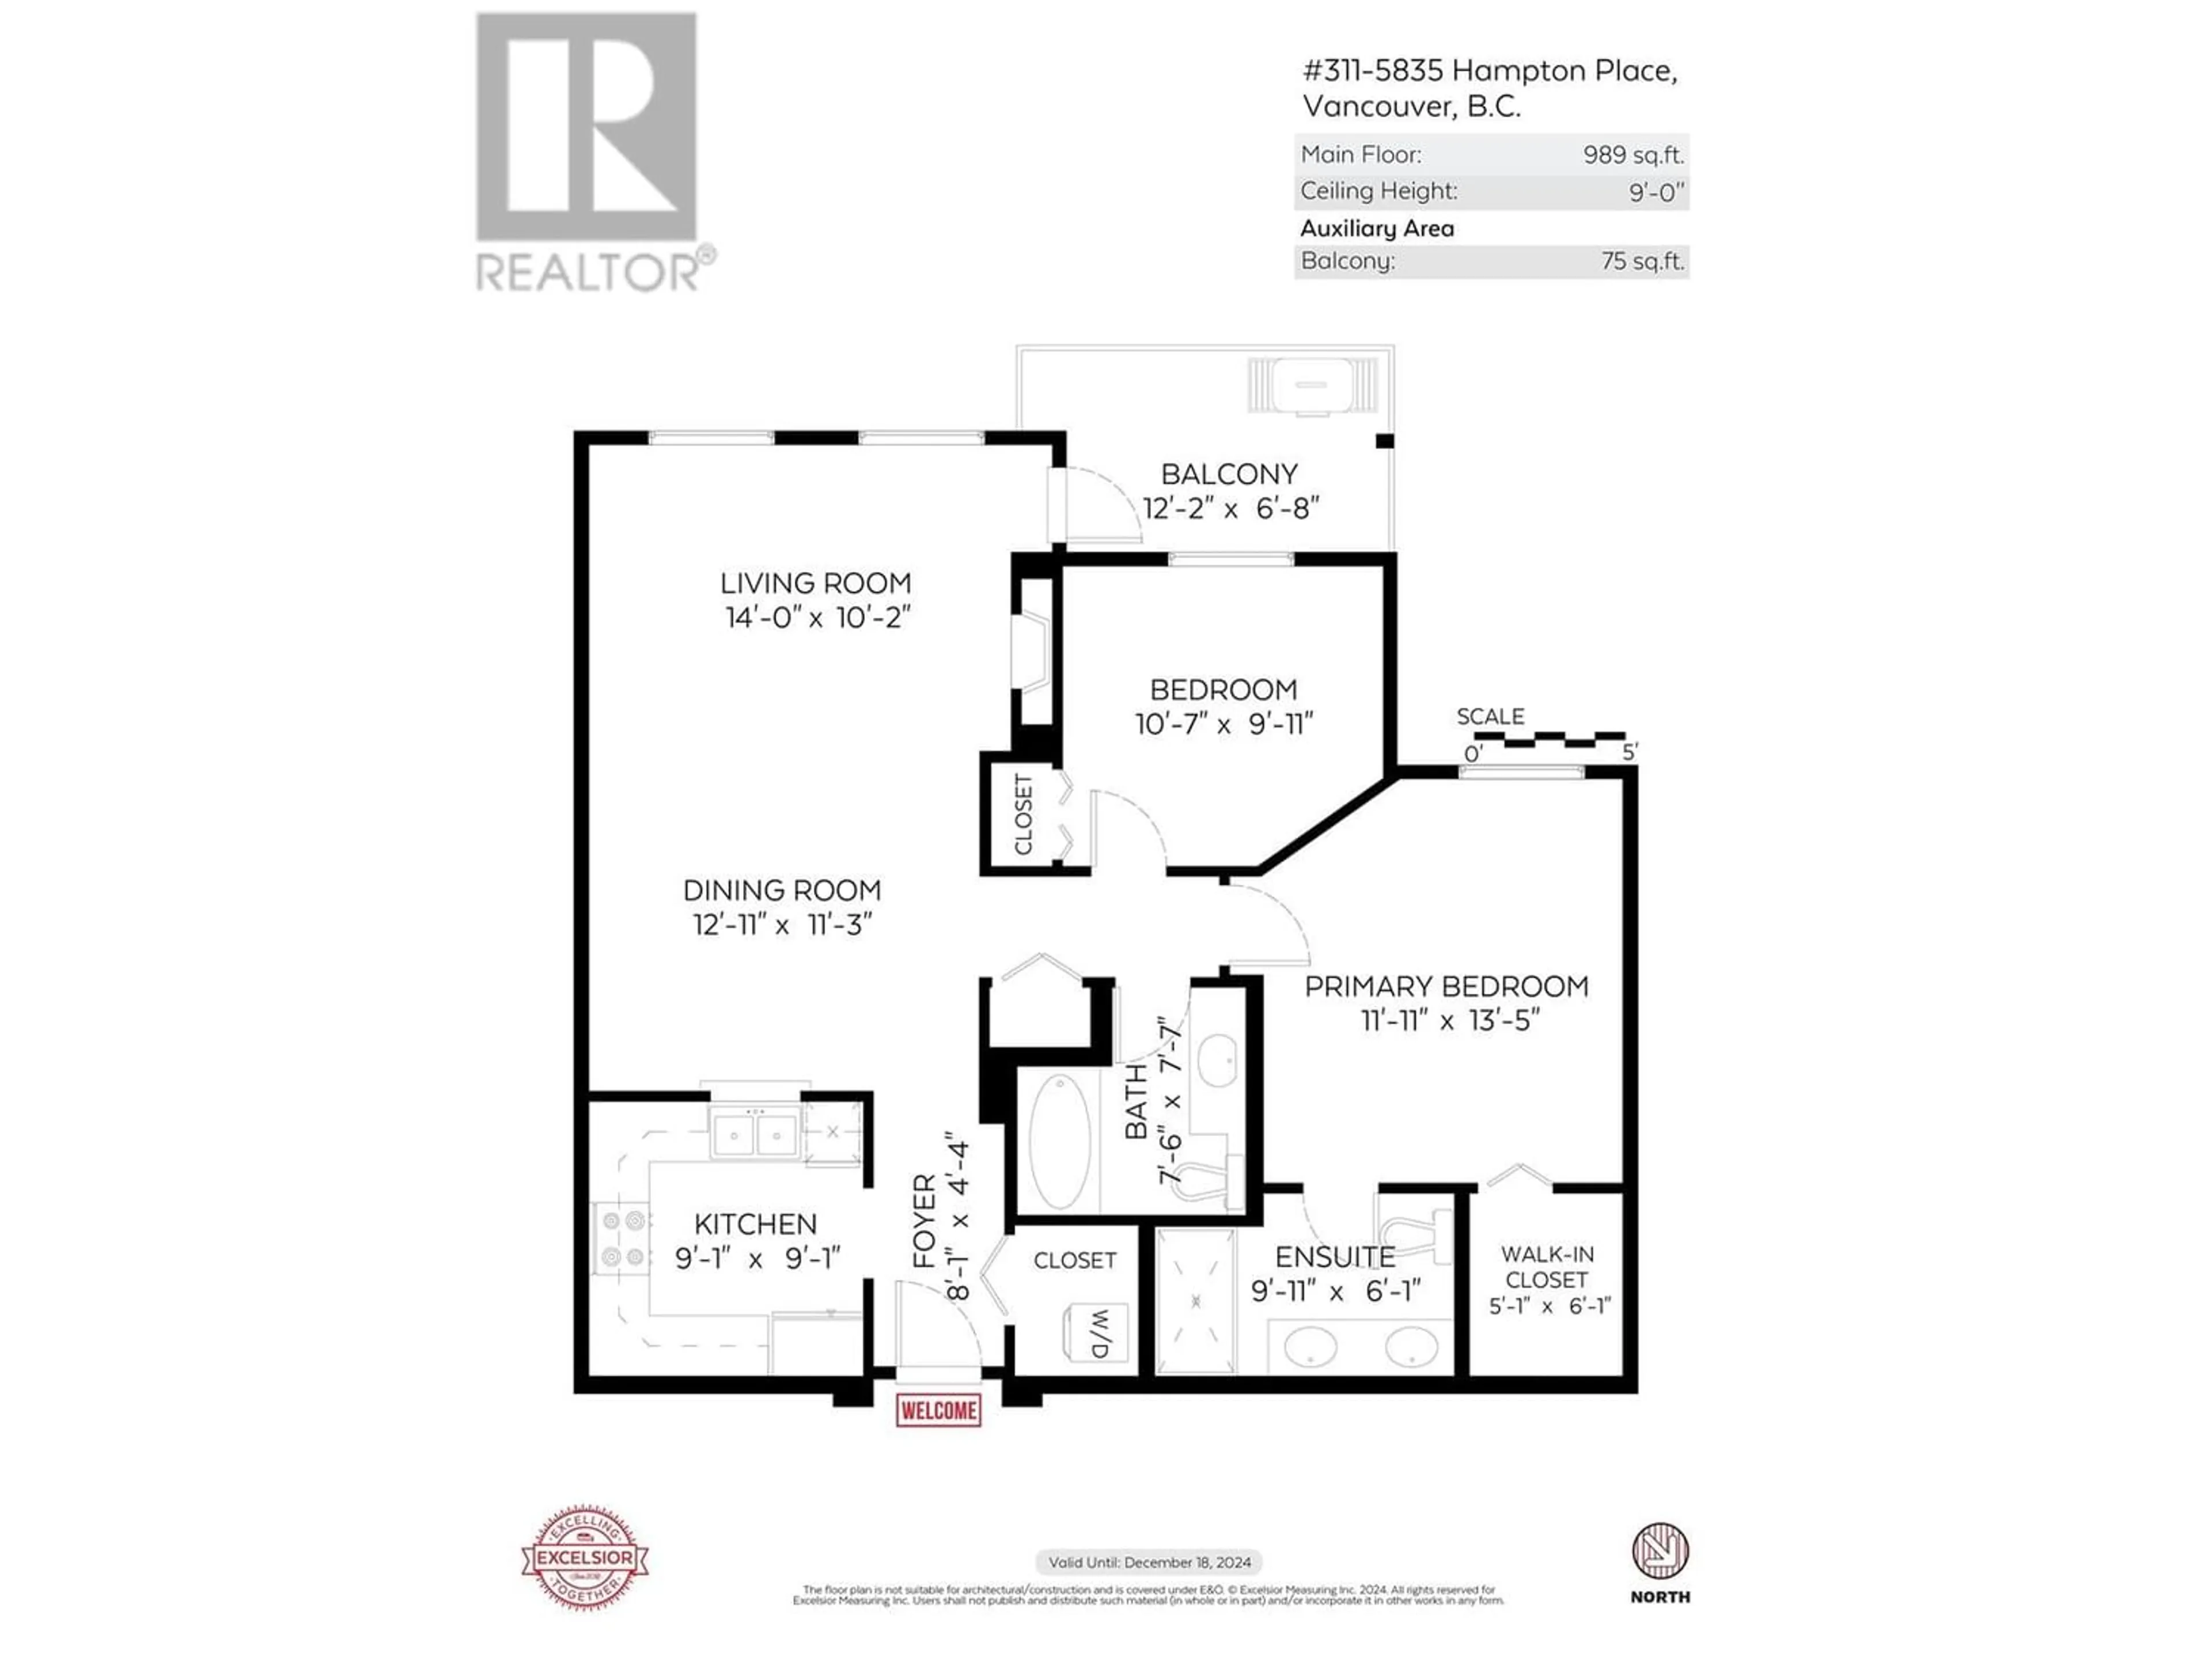 Floor plan for 311 5835 HAMPTON PLACE, Vancouver British Columbia V6T2G2